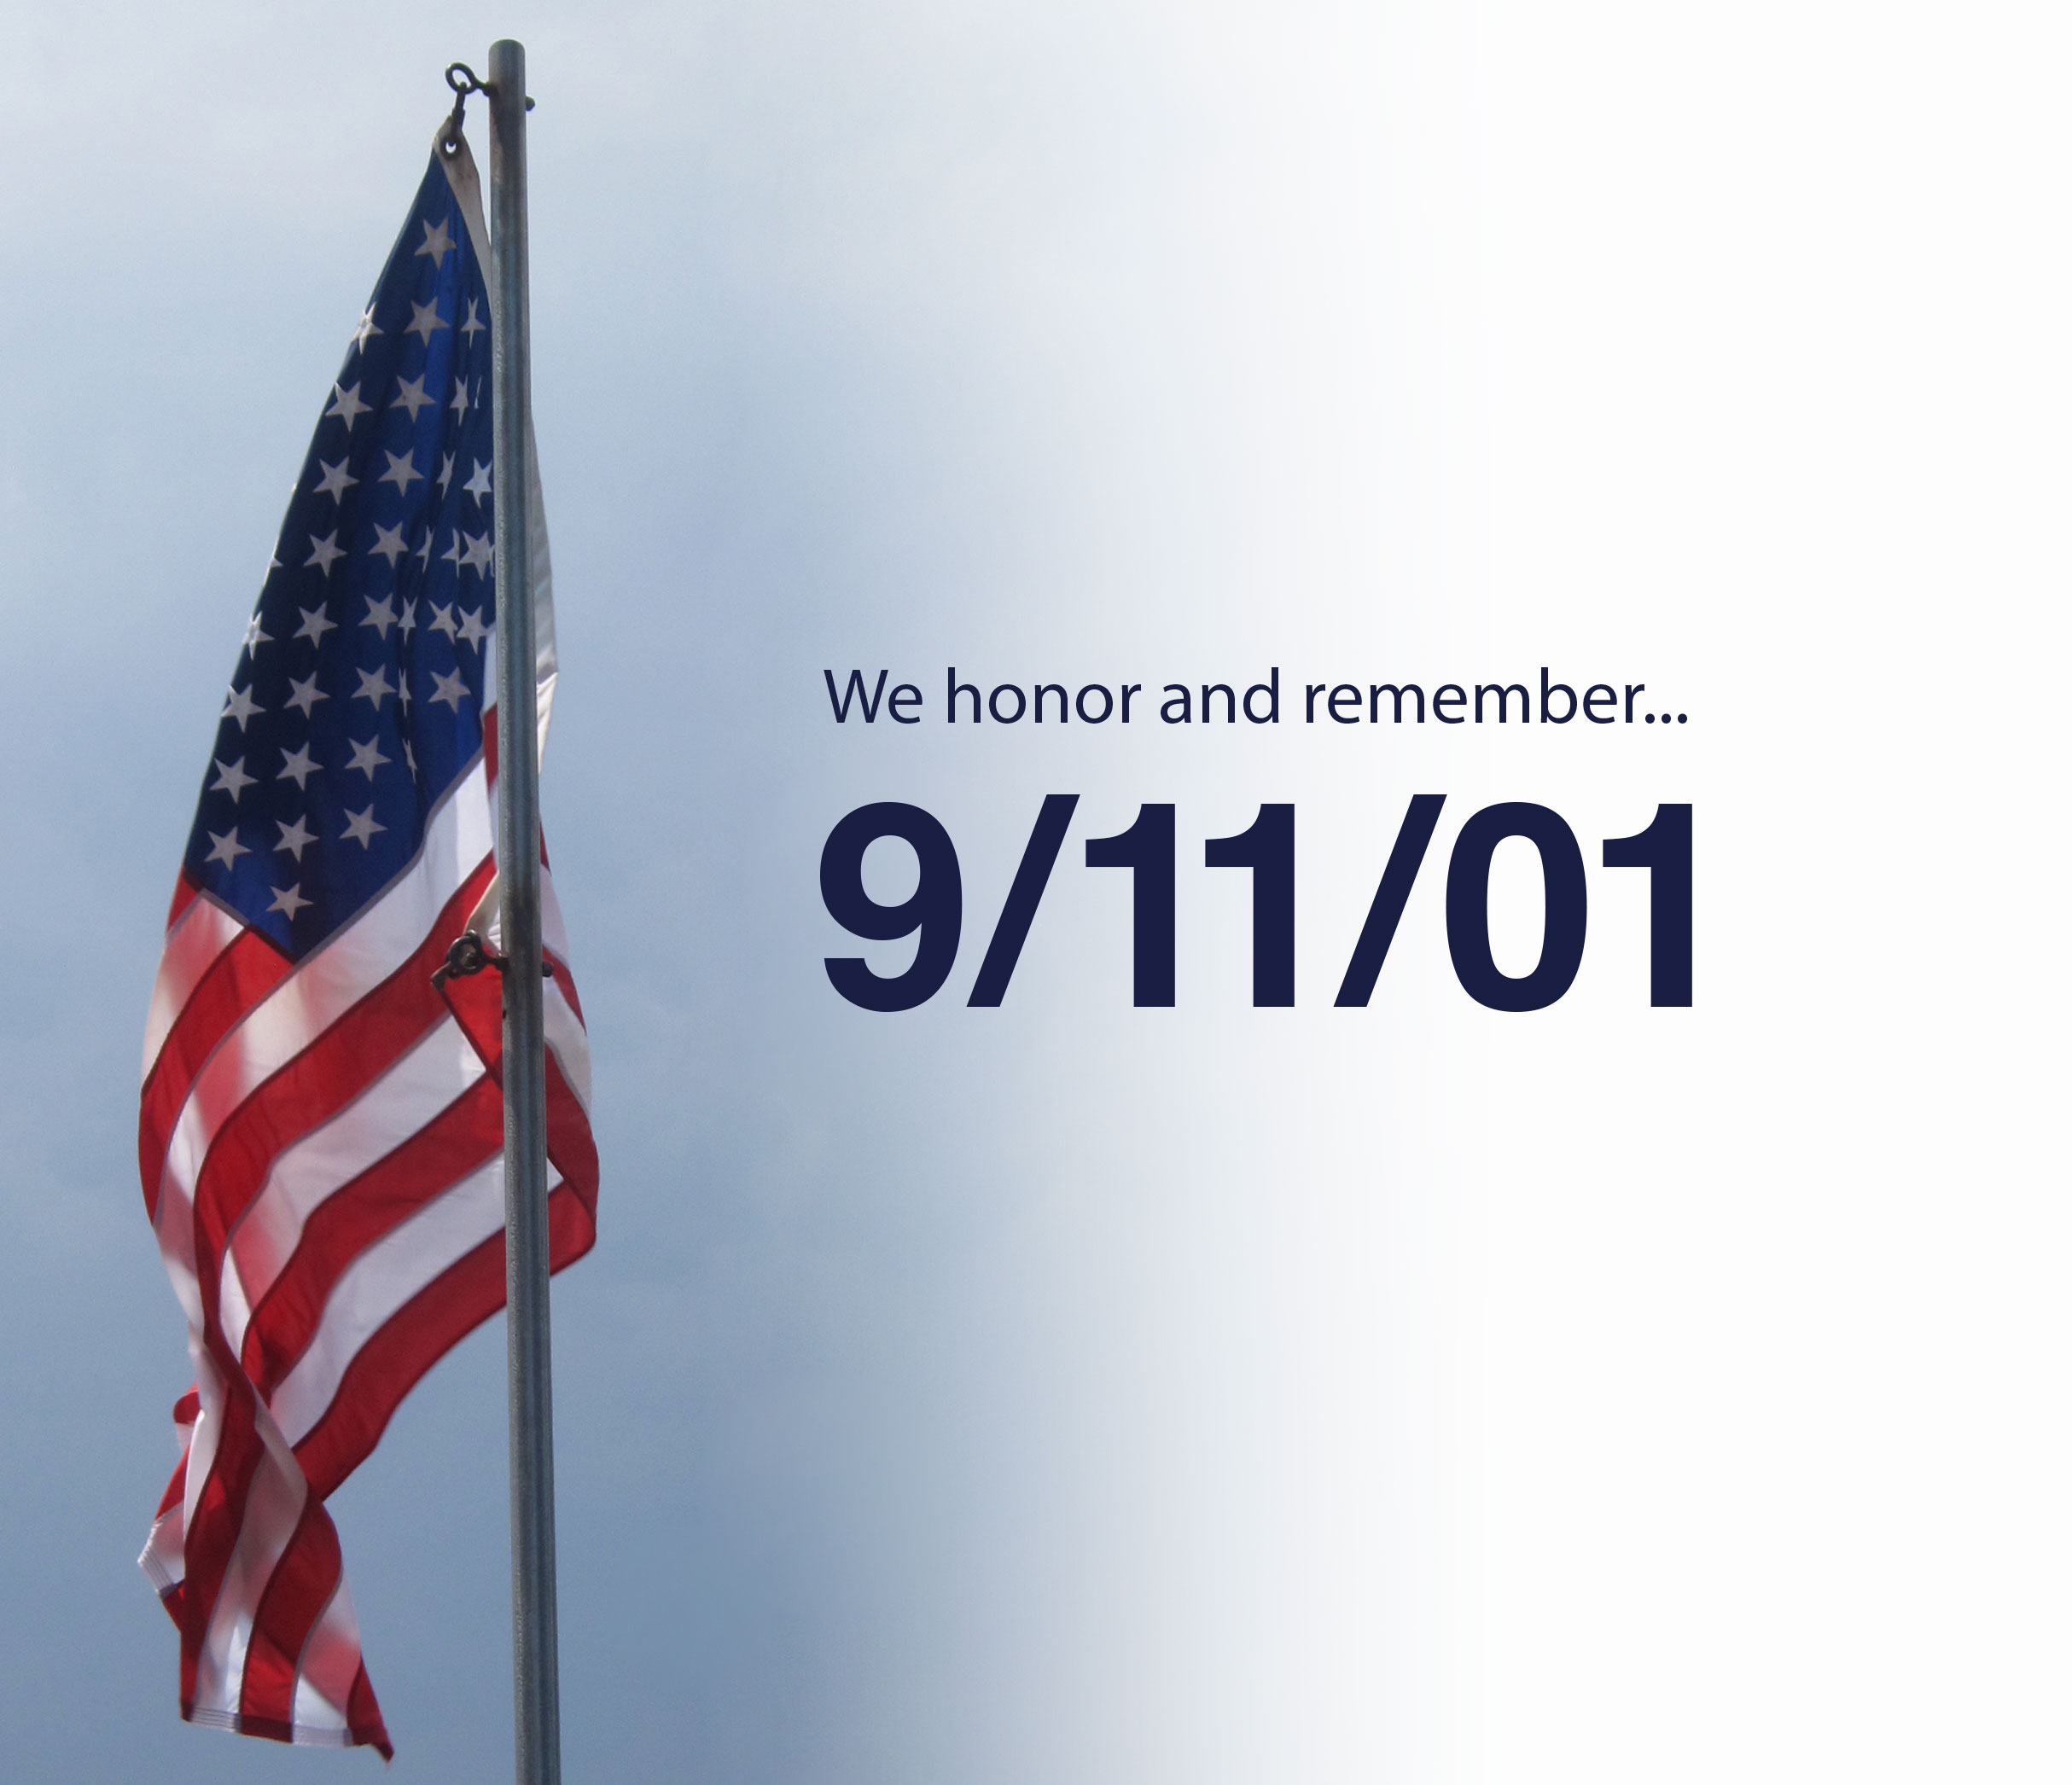 May We Never Forget 09-11-01